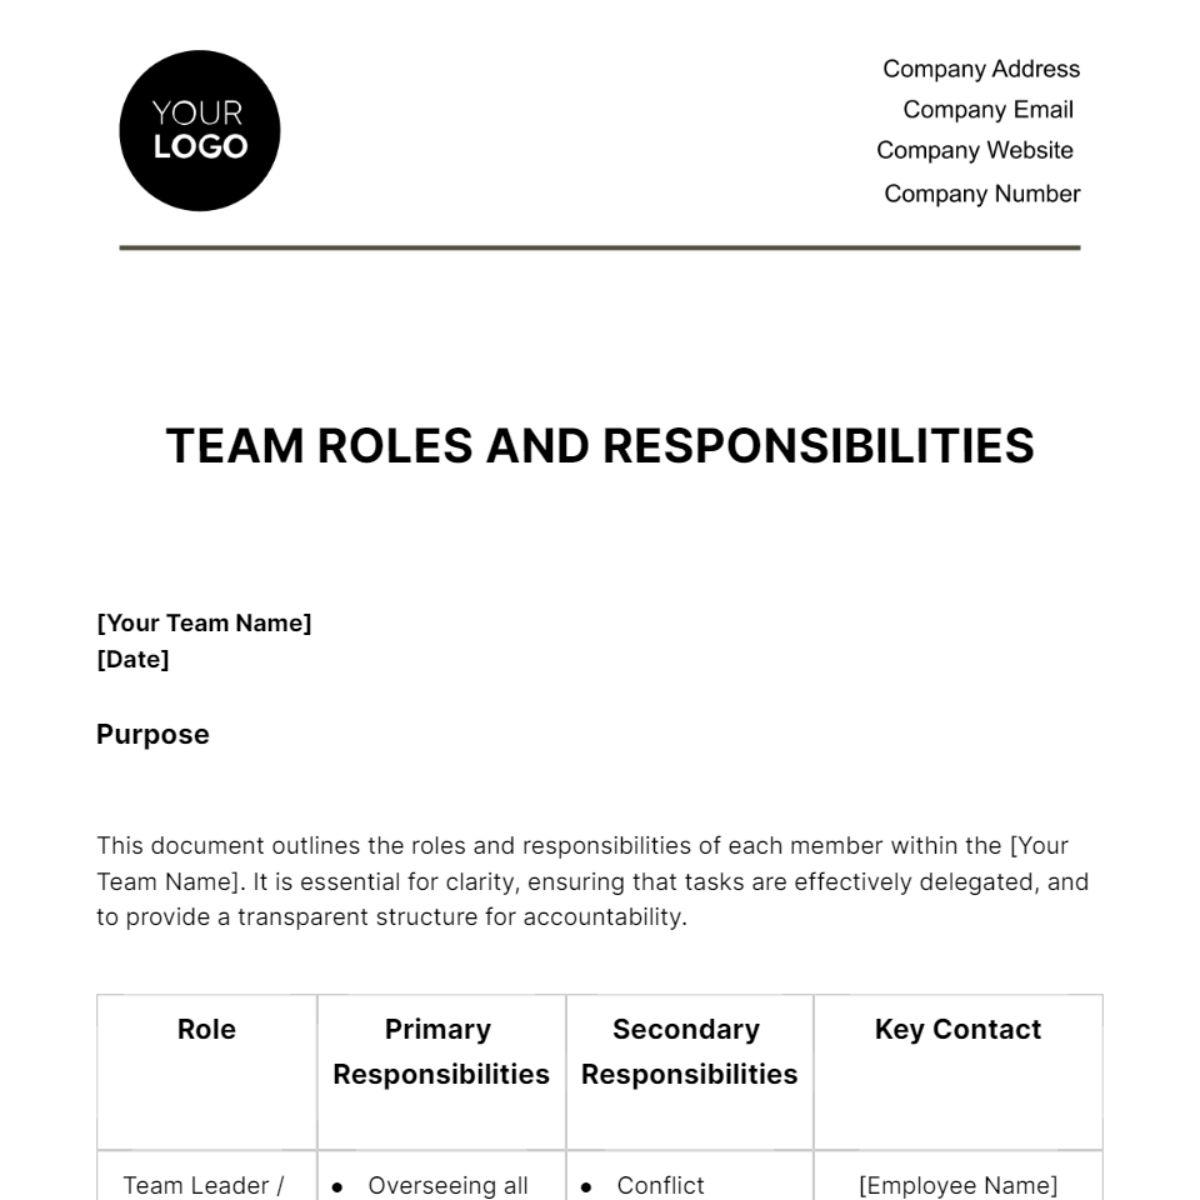 Free Team Roles and Responsibilities Overview HR Template